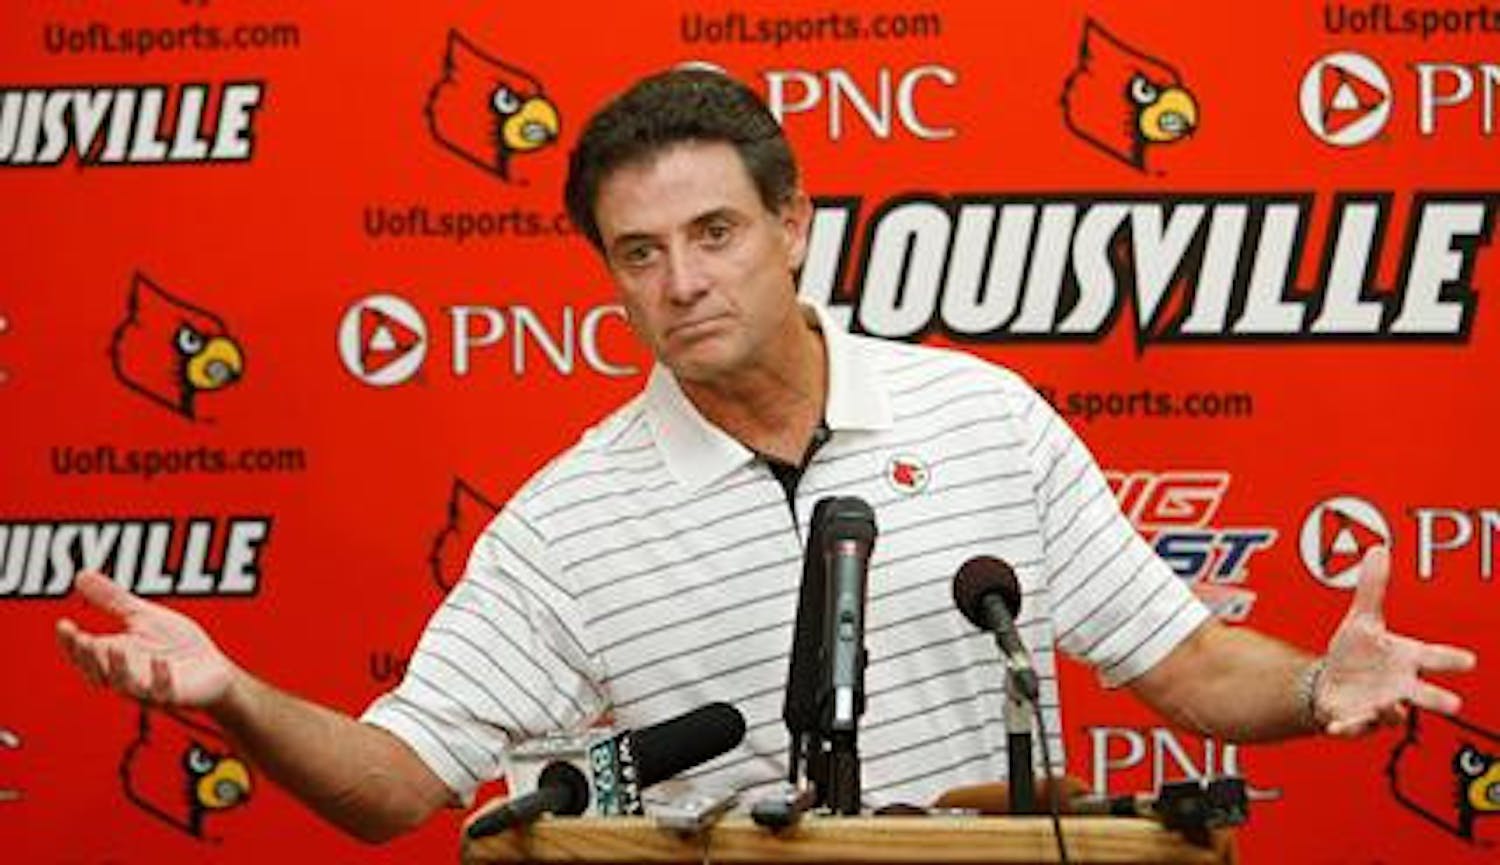 Pitino disgusted with media coverage of scandal